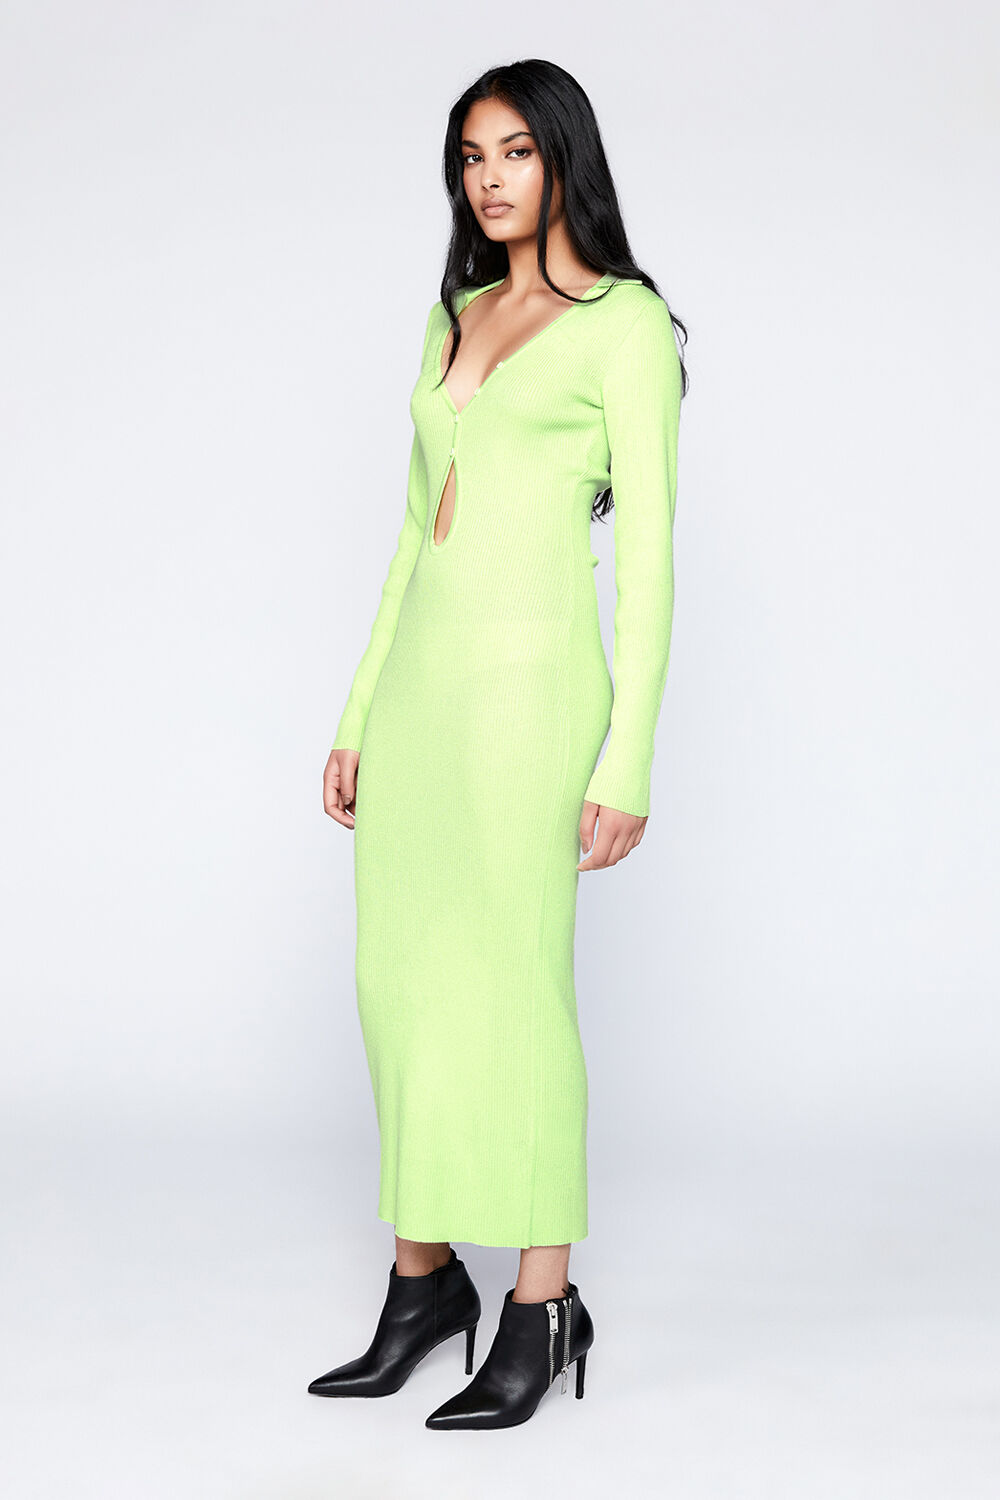 ROSARIO KNIT DRESS in colour LIMEADE